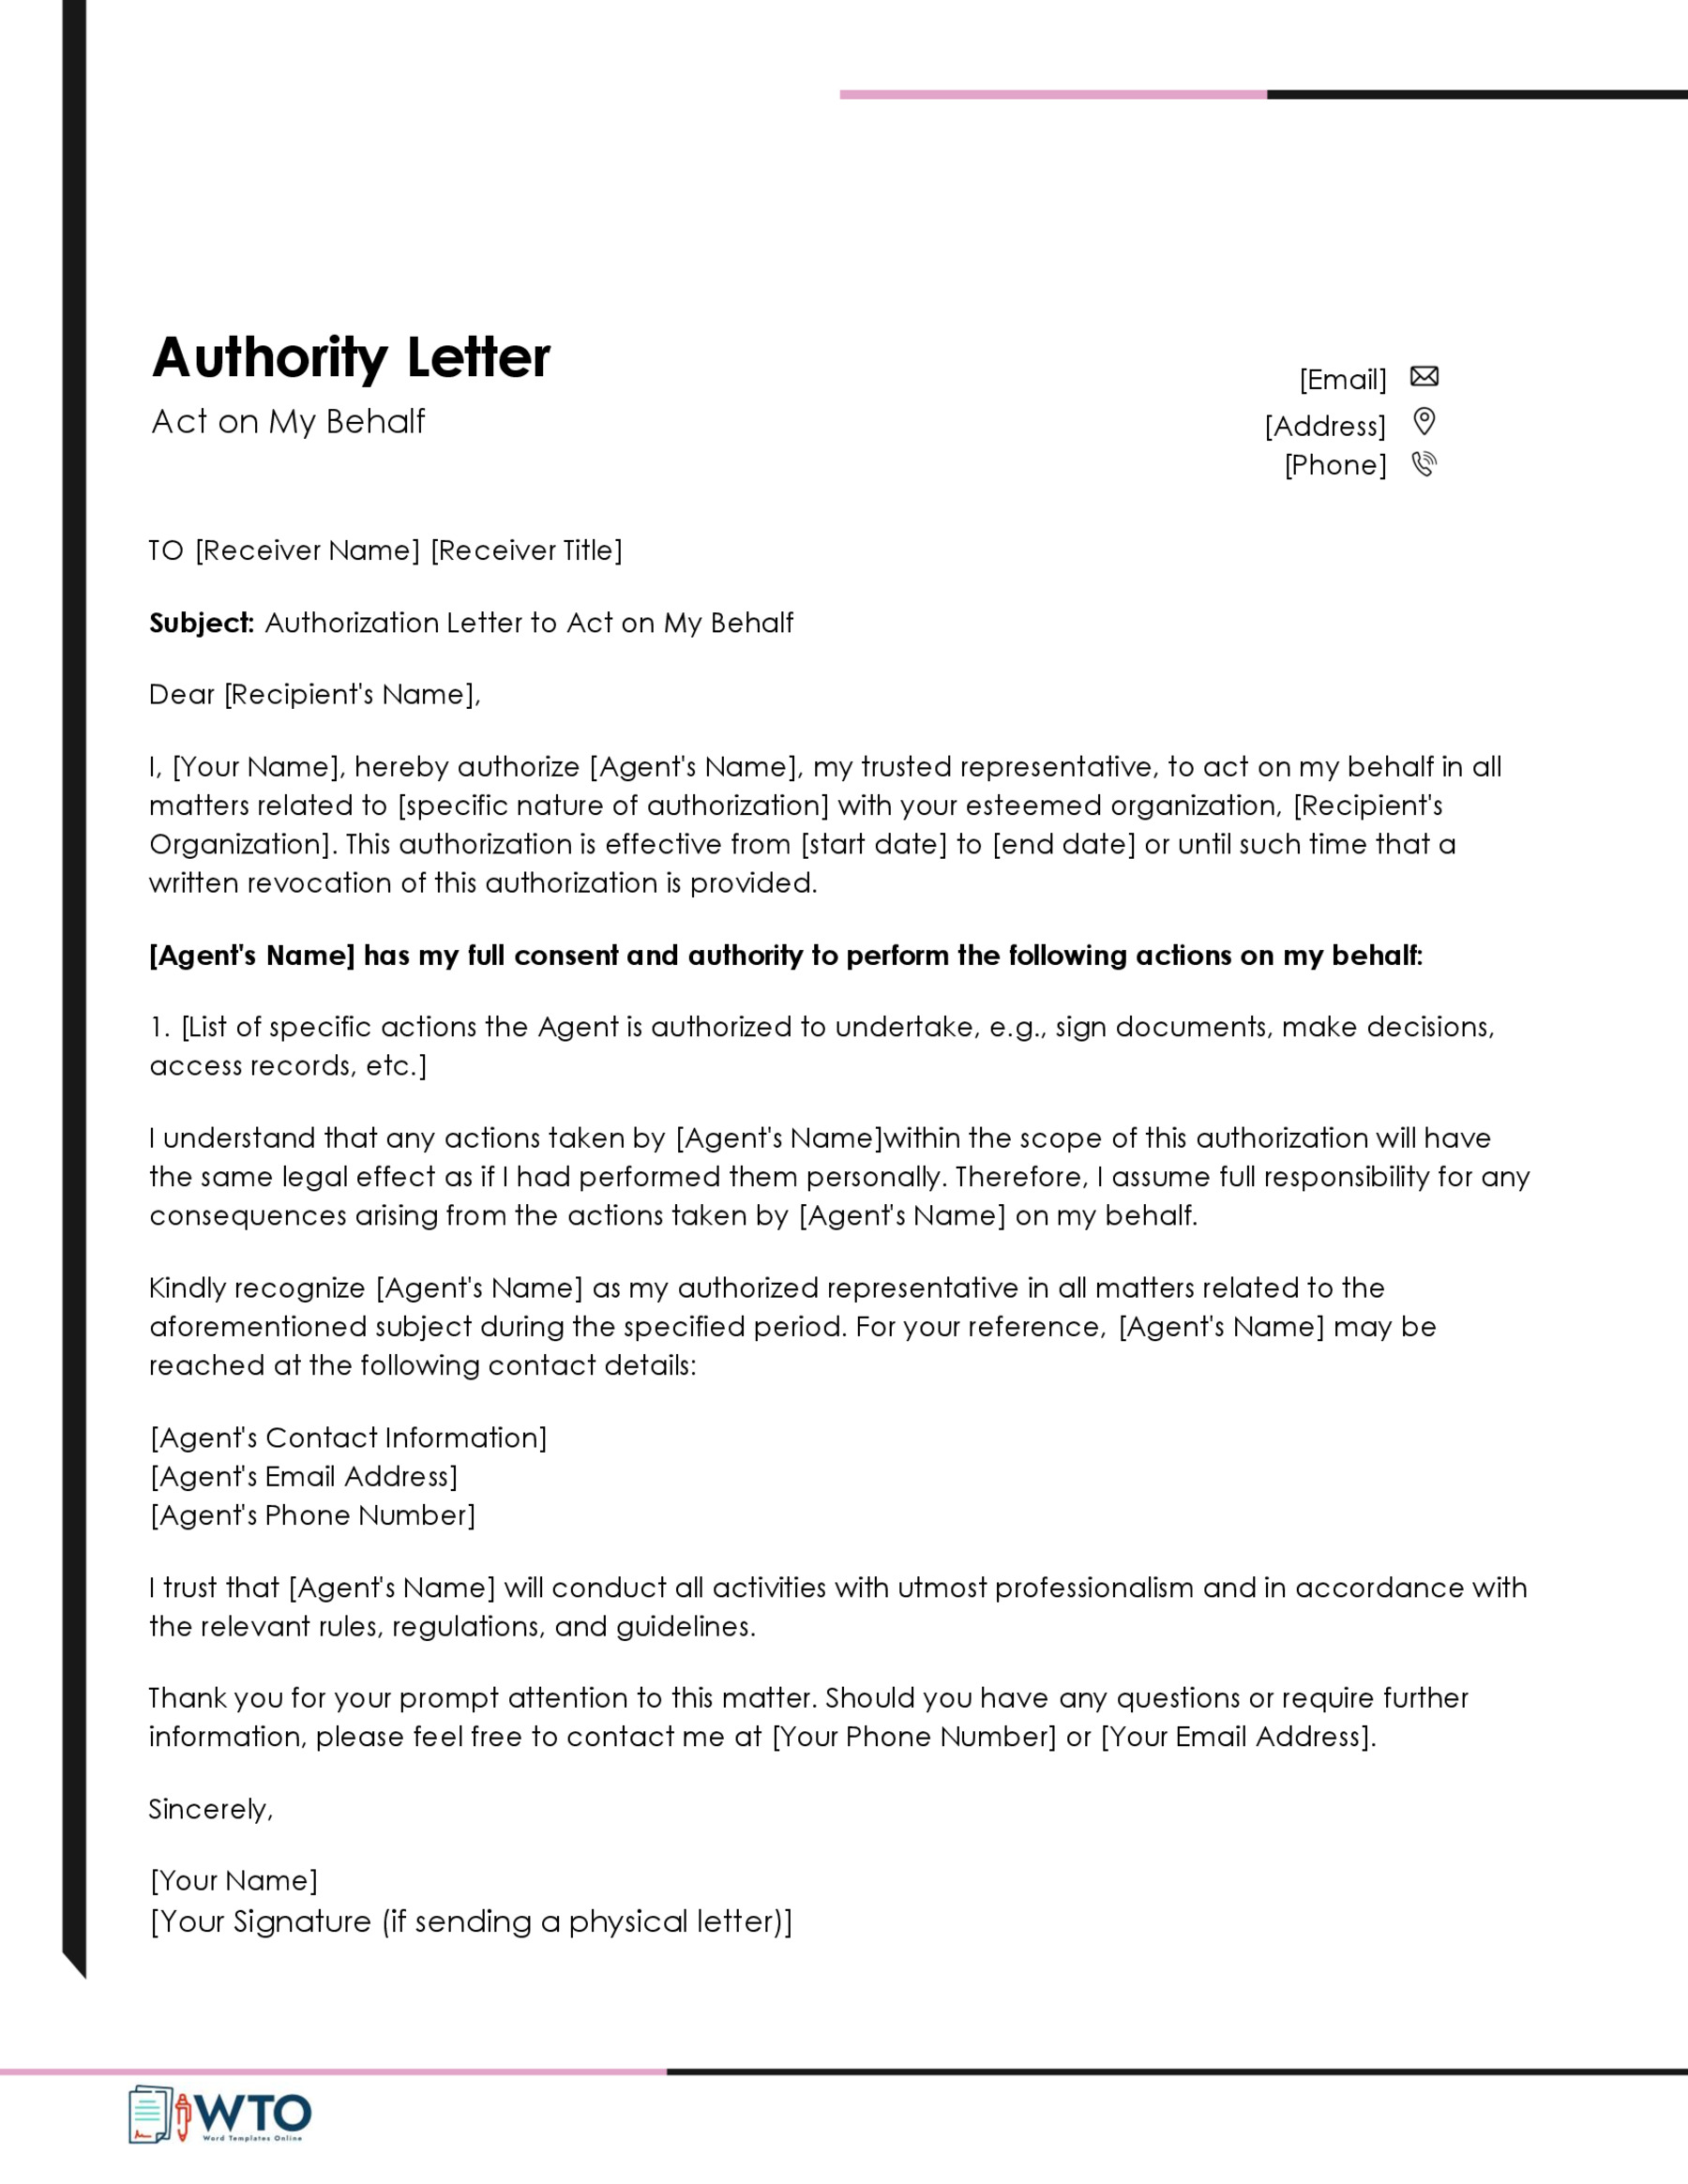 Authorization Letter Template to Act on Behalf